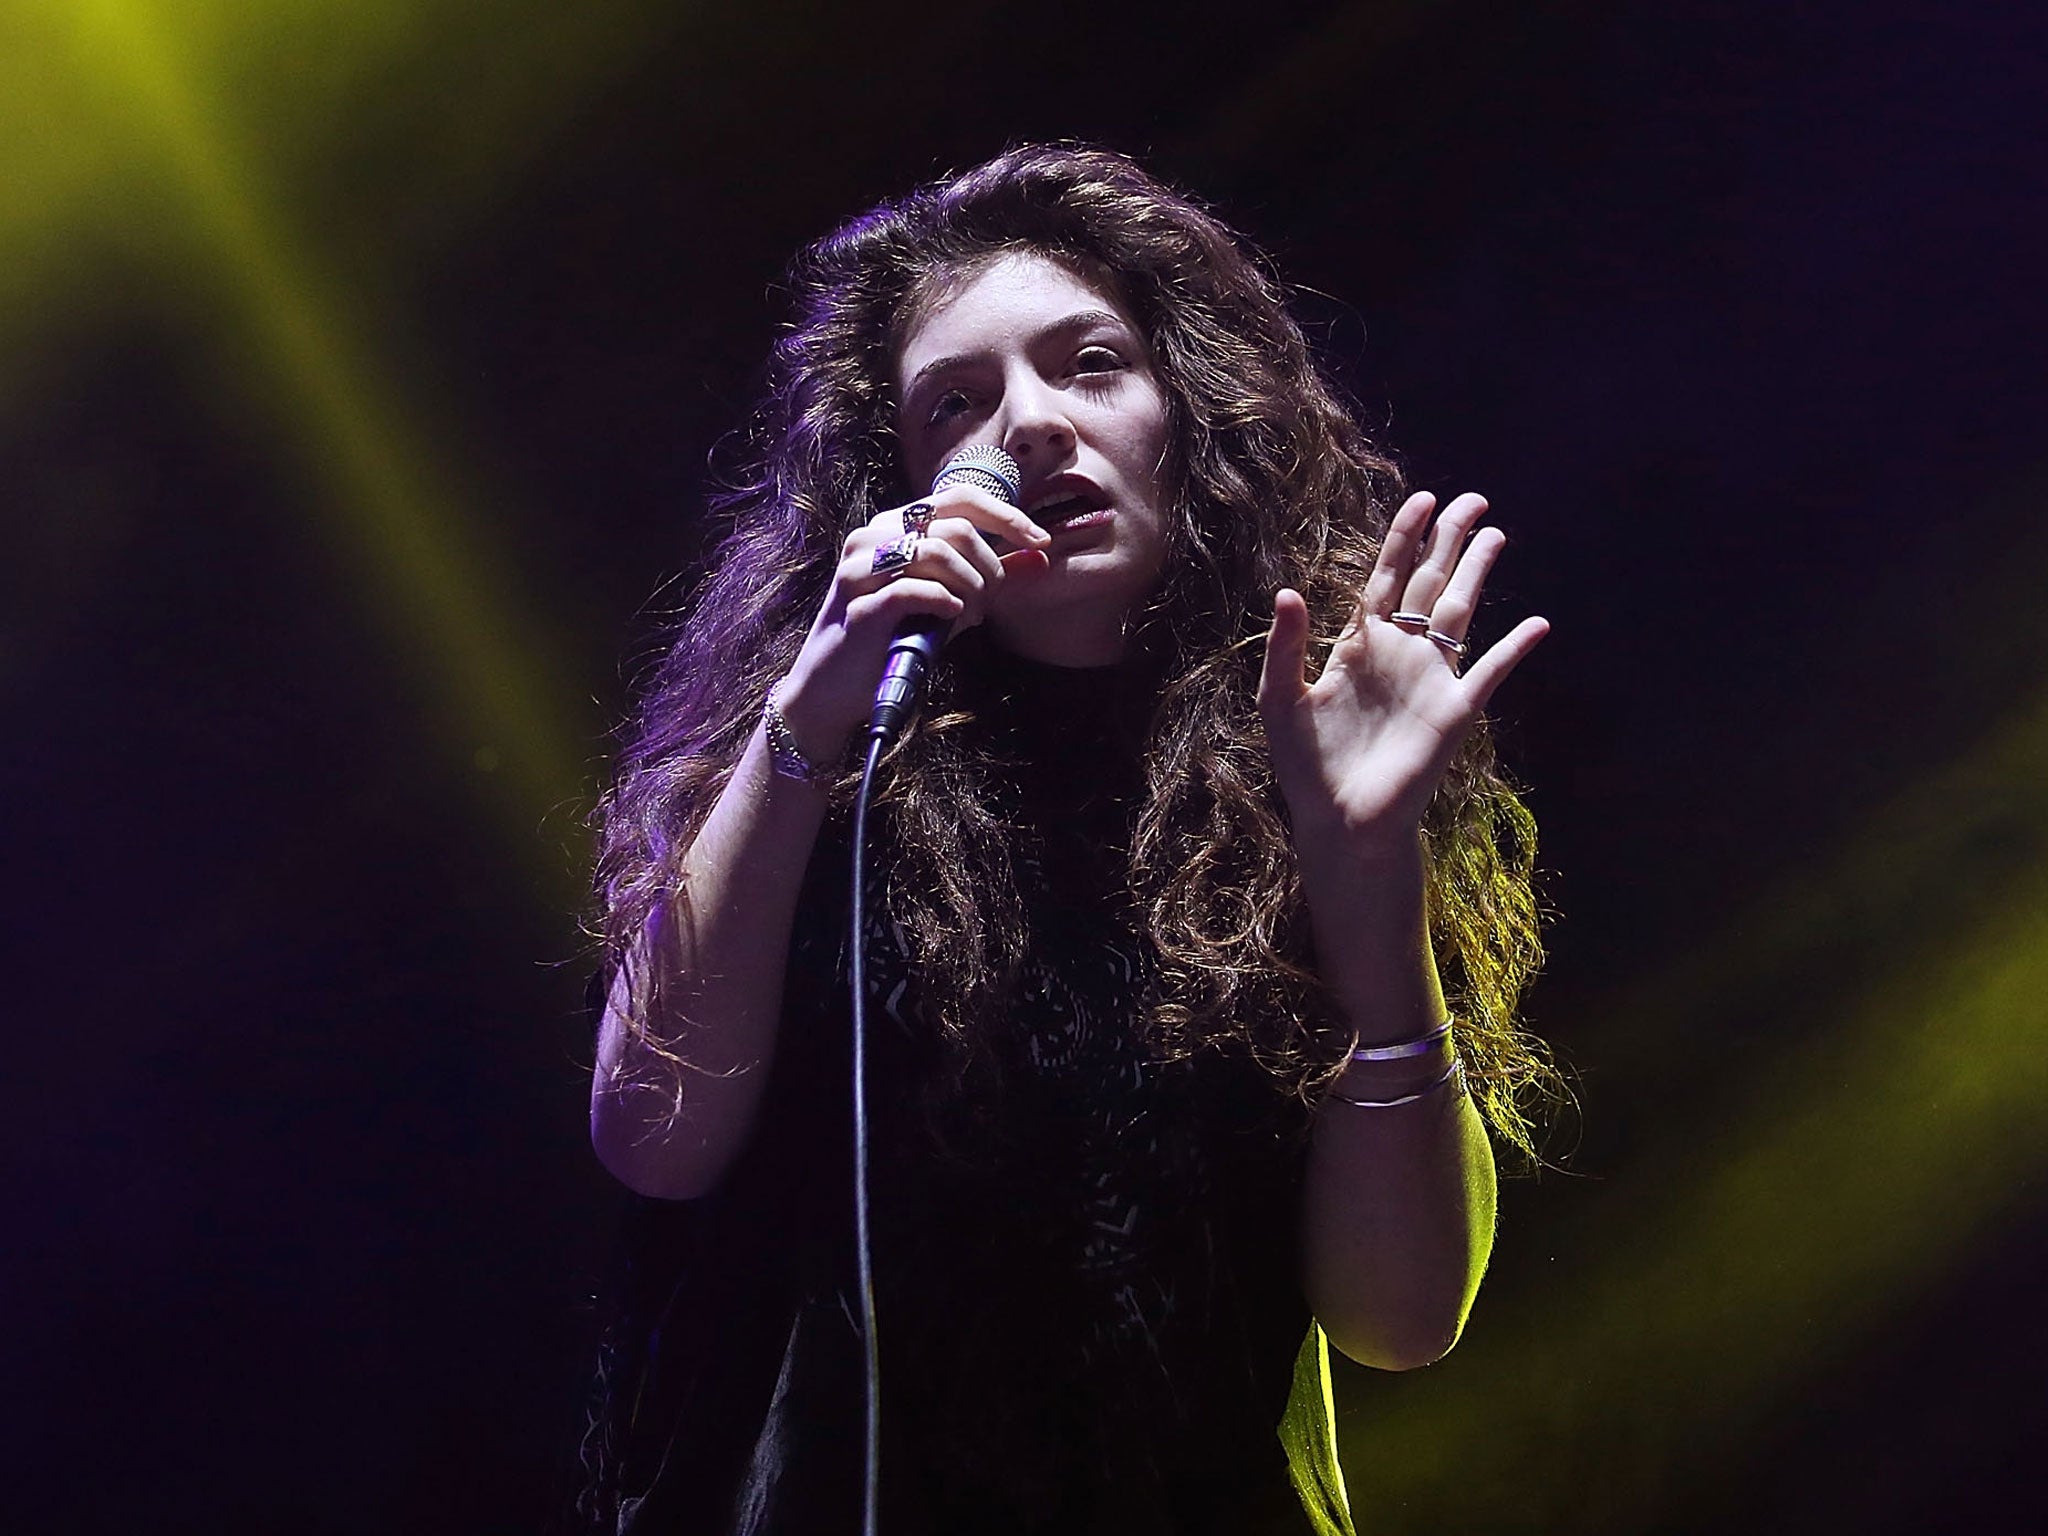 Lorde will be teaming up with dance duo Disclosure for a performance at tonight's Brit Awards